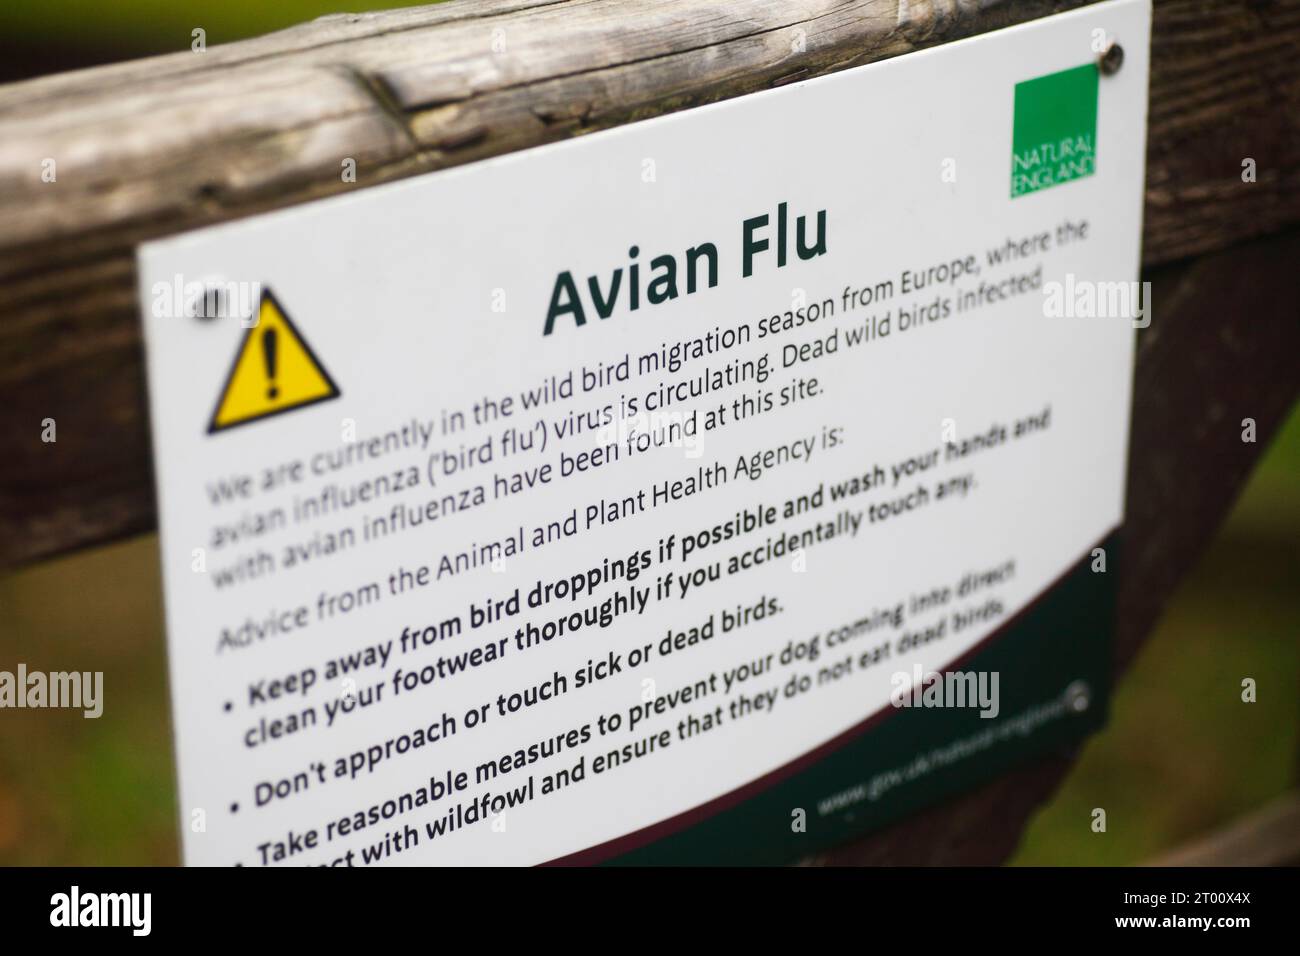 Avian flu information and warning sign. Stock Photo